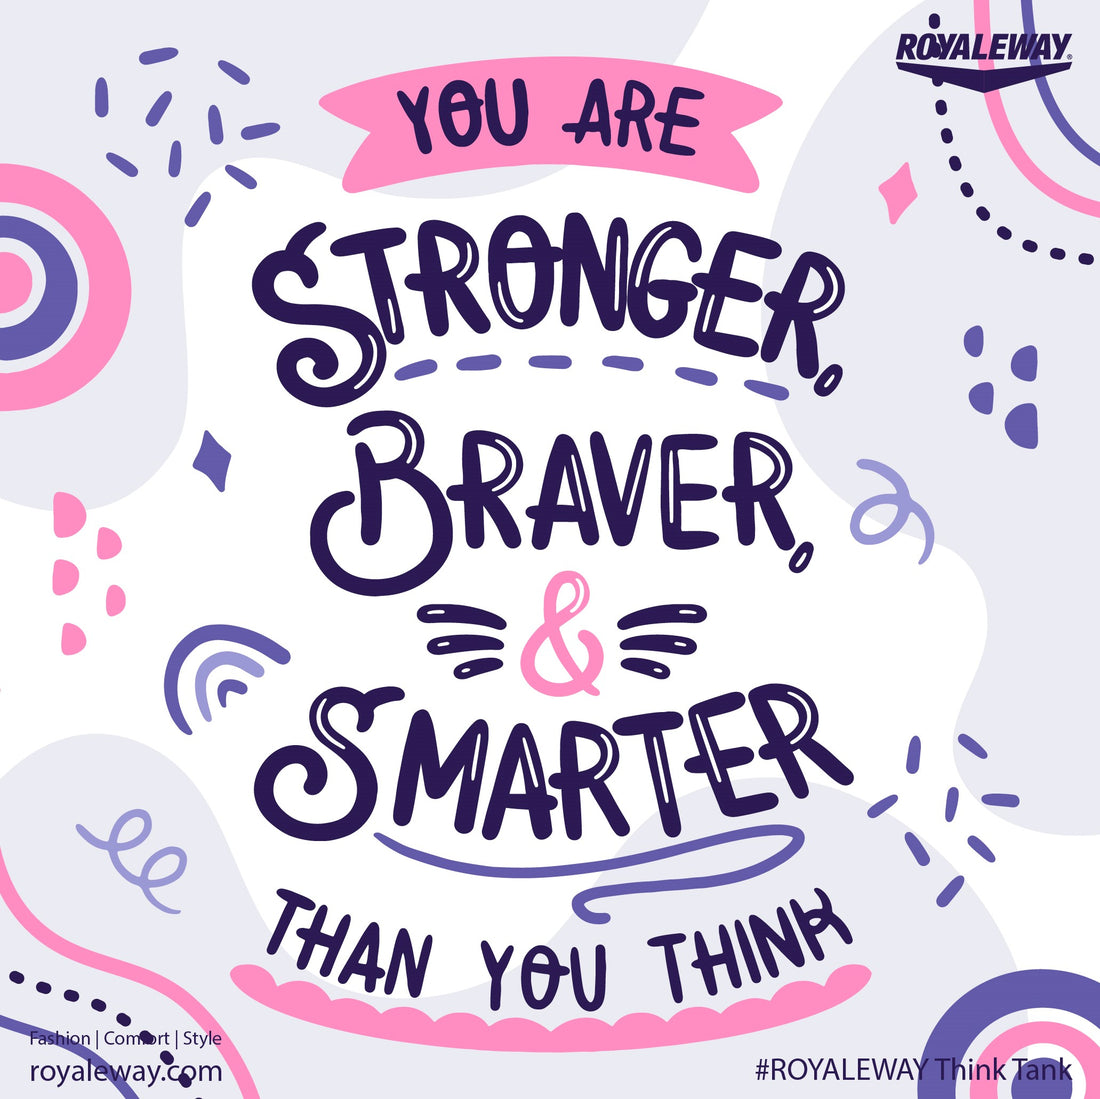 You are Stronger ,Braver and Smarter than you Think. ROYALEWAY Think Tank.